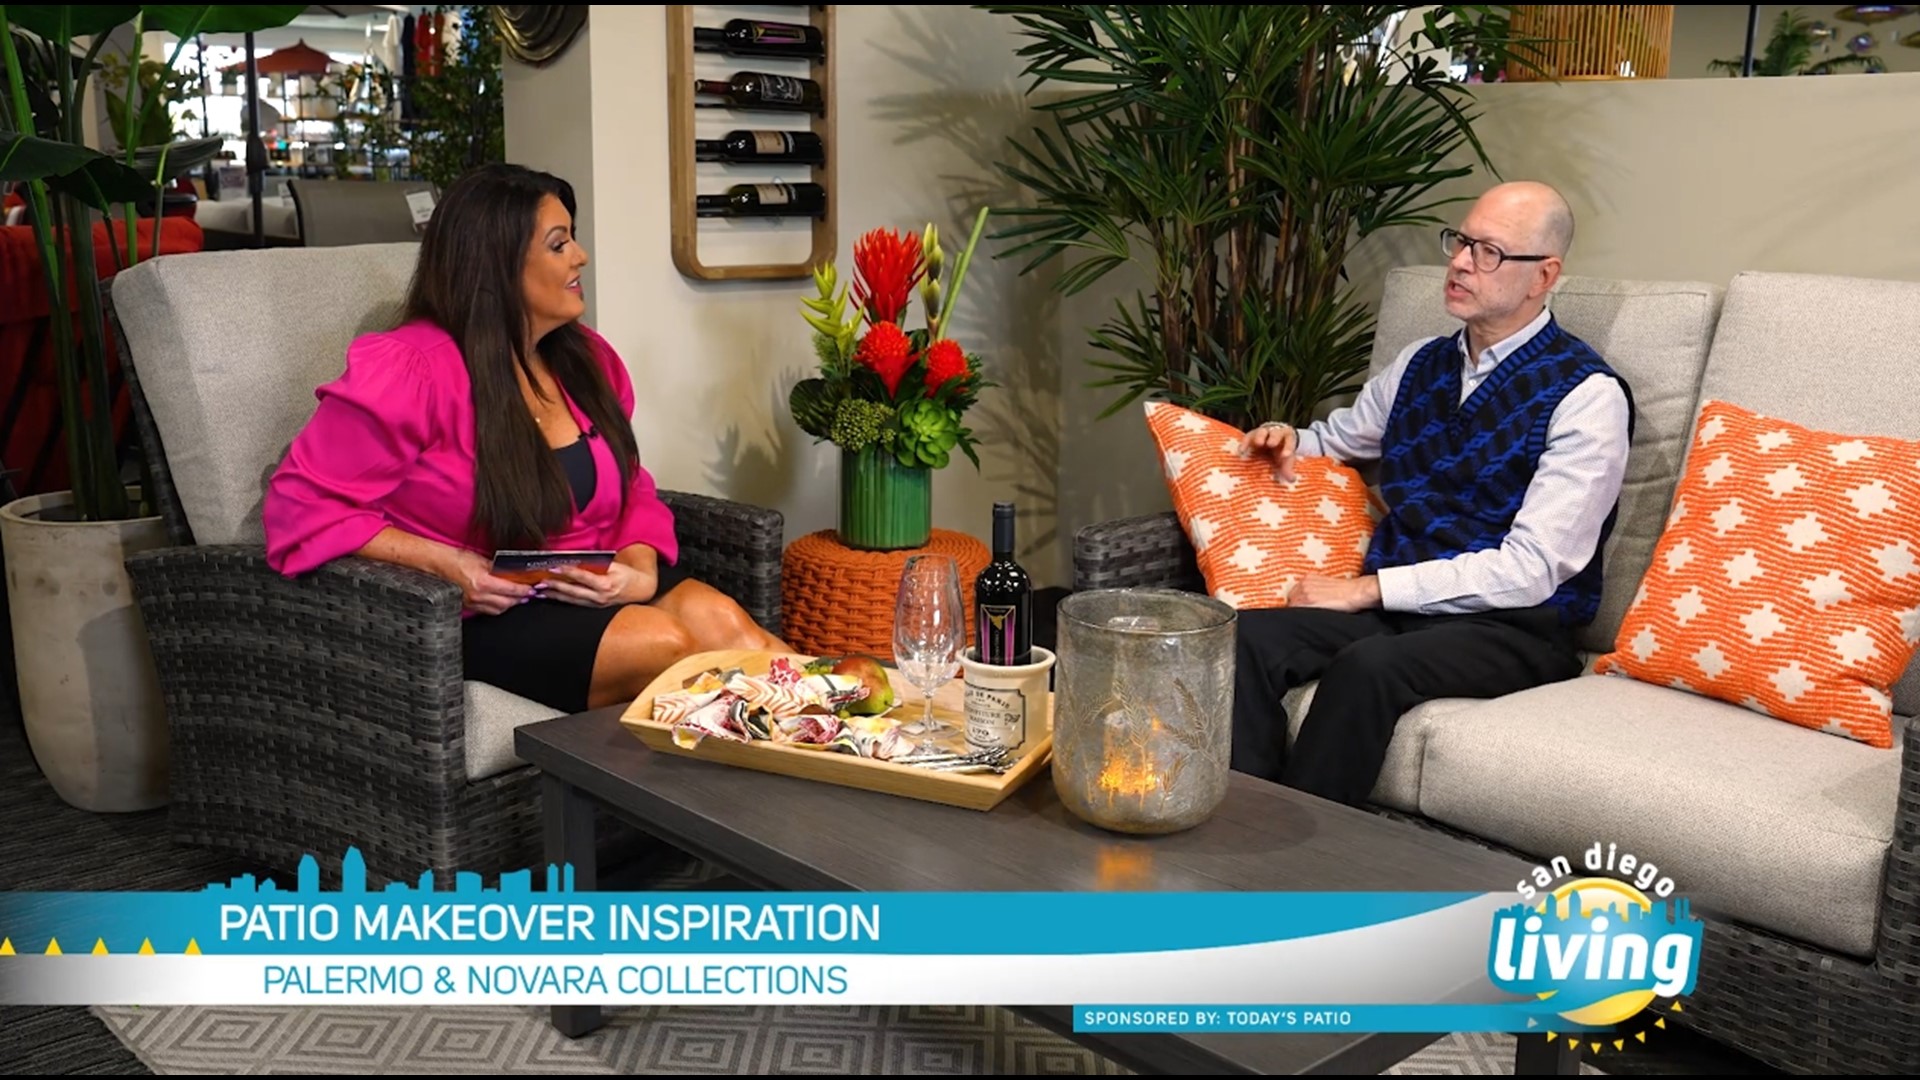 Thomas Ziska joins our Laura Cavanaugh to share the latest trends and ideas to create your outdoor oasis. Sponsored by: Today’s Patio